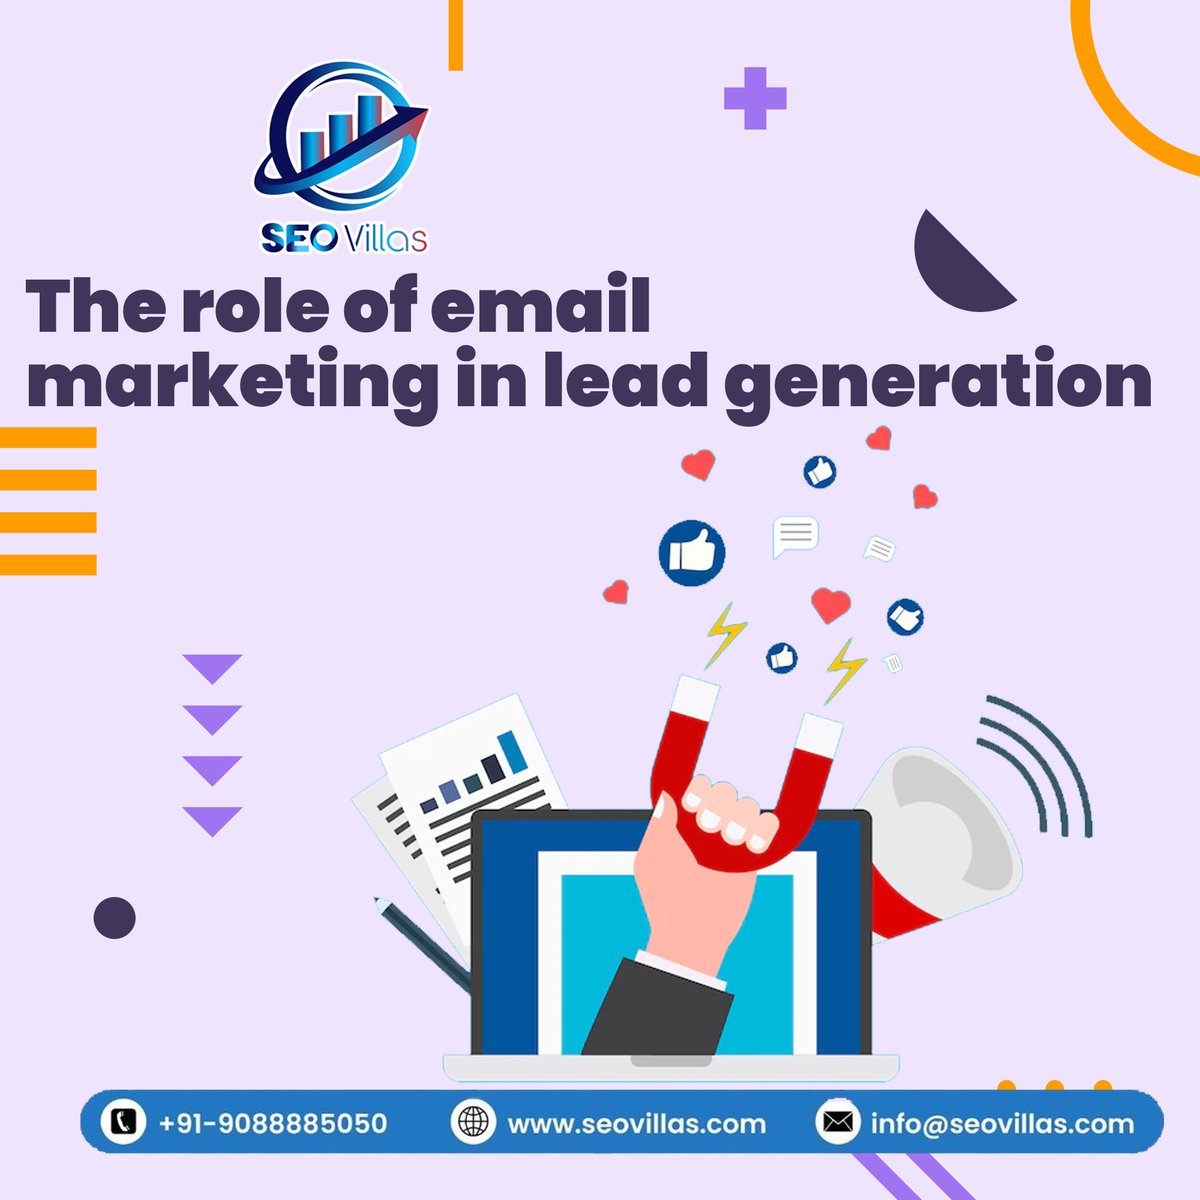 Maximize lead gen with email marketing! 
👉Targeted campaigns
👉personalization
👉lead nurturing
👉clear CTA & analytics 
Increase conversions & build trust with subscribers. 
#EmailMarketing #LeadGeneration #Conversions #TargetedCampaigns #seovillas